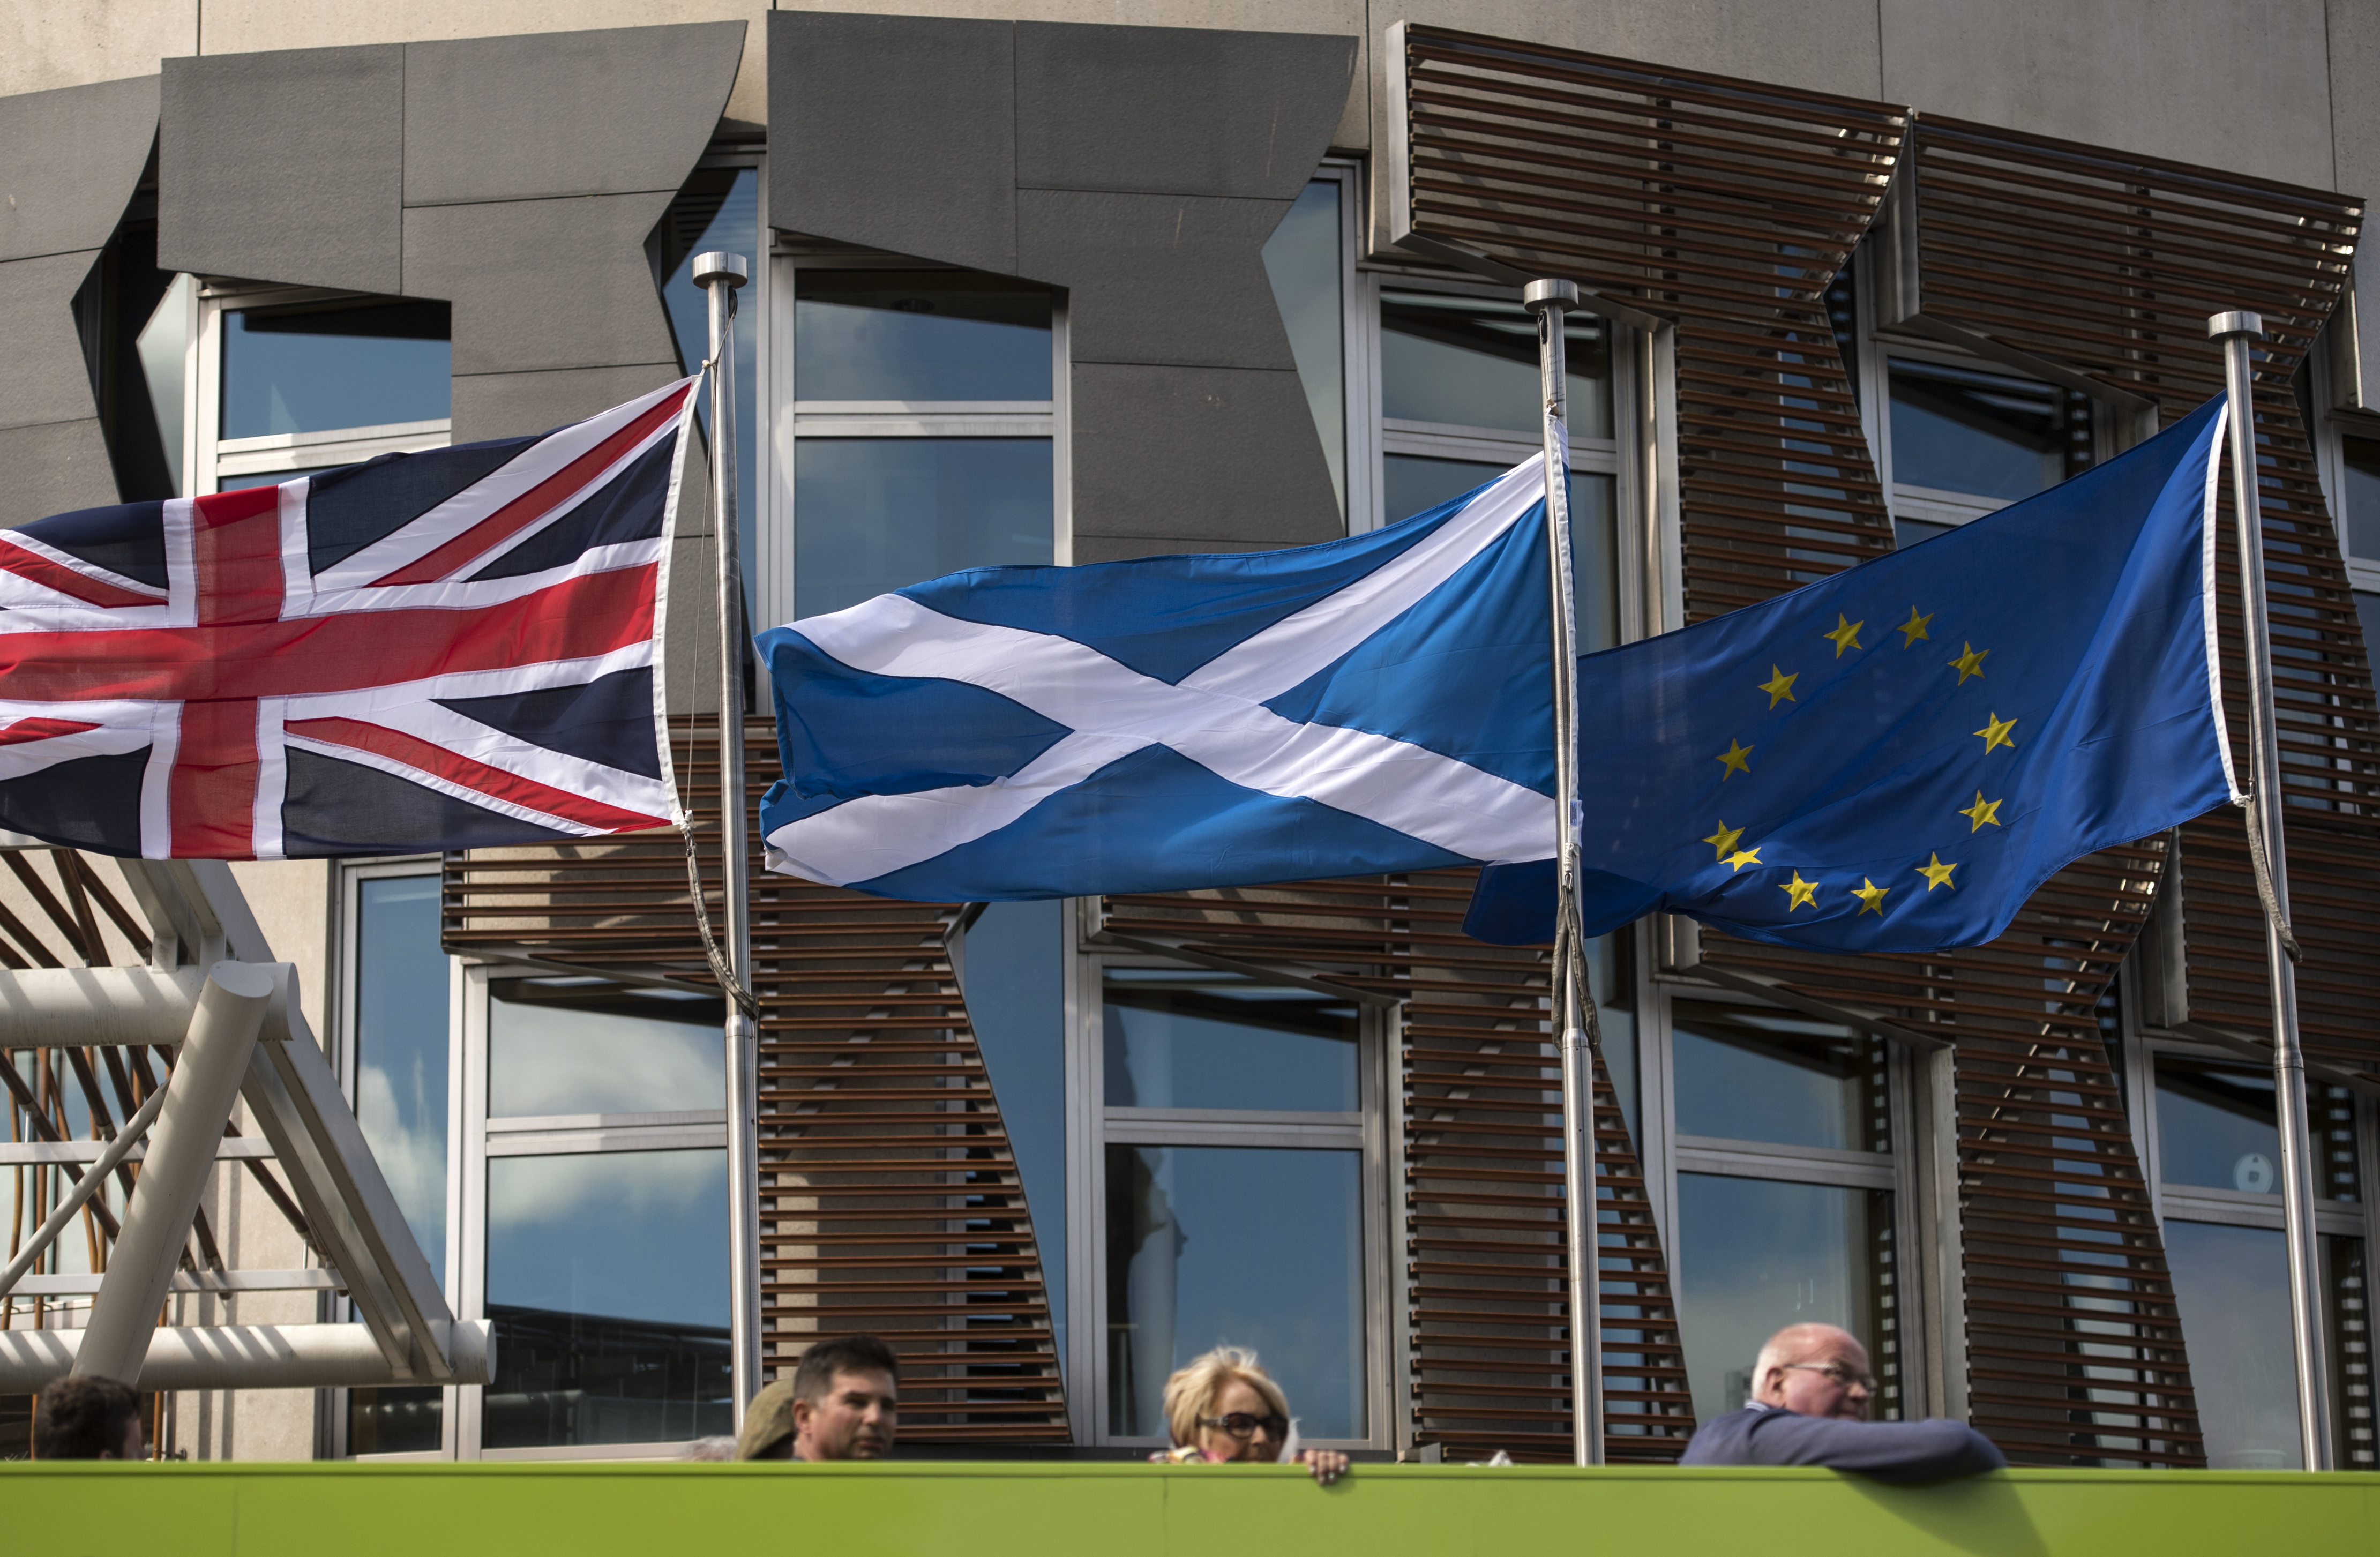 A Scottish Saltire (C) flies between a Union flag (L) and a European Union (EU) flag in front of the Scottish Parliament building in Edinburgh, Scotland on June 27, 2016. British leaders battled to calm markets and the country Monday after its shock vote to leave the EU, while insisting London would be not rushed into a quick divorce. Britain's historic decision to be the first country to leave the 28-nation bloc has fuelled fears of a break-up of the United Kingdom with Scotland eyeing a new independence poll, and created turmoil in the opposition Labour party where leader Jeremy Corbyn is battling an all-out revolt. / AFP PHOTO / OLI SCARFF